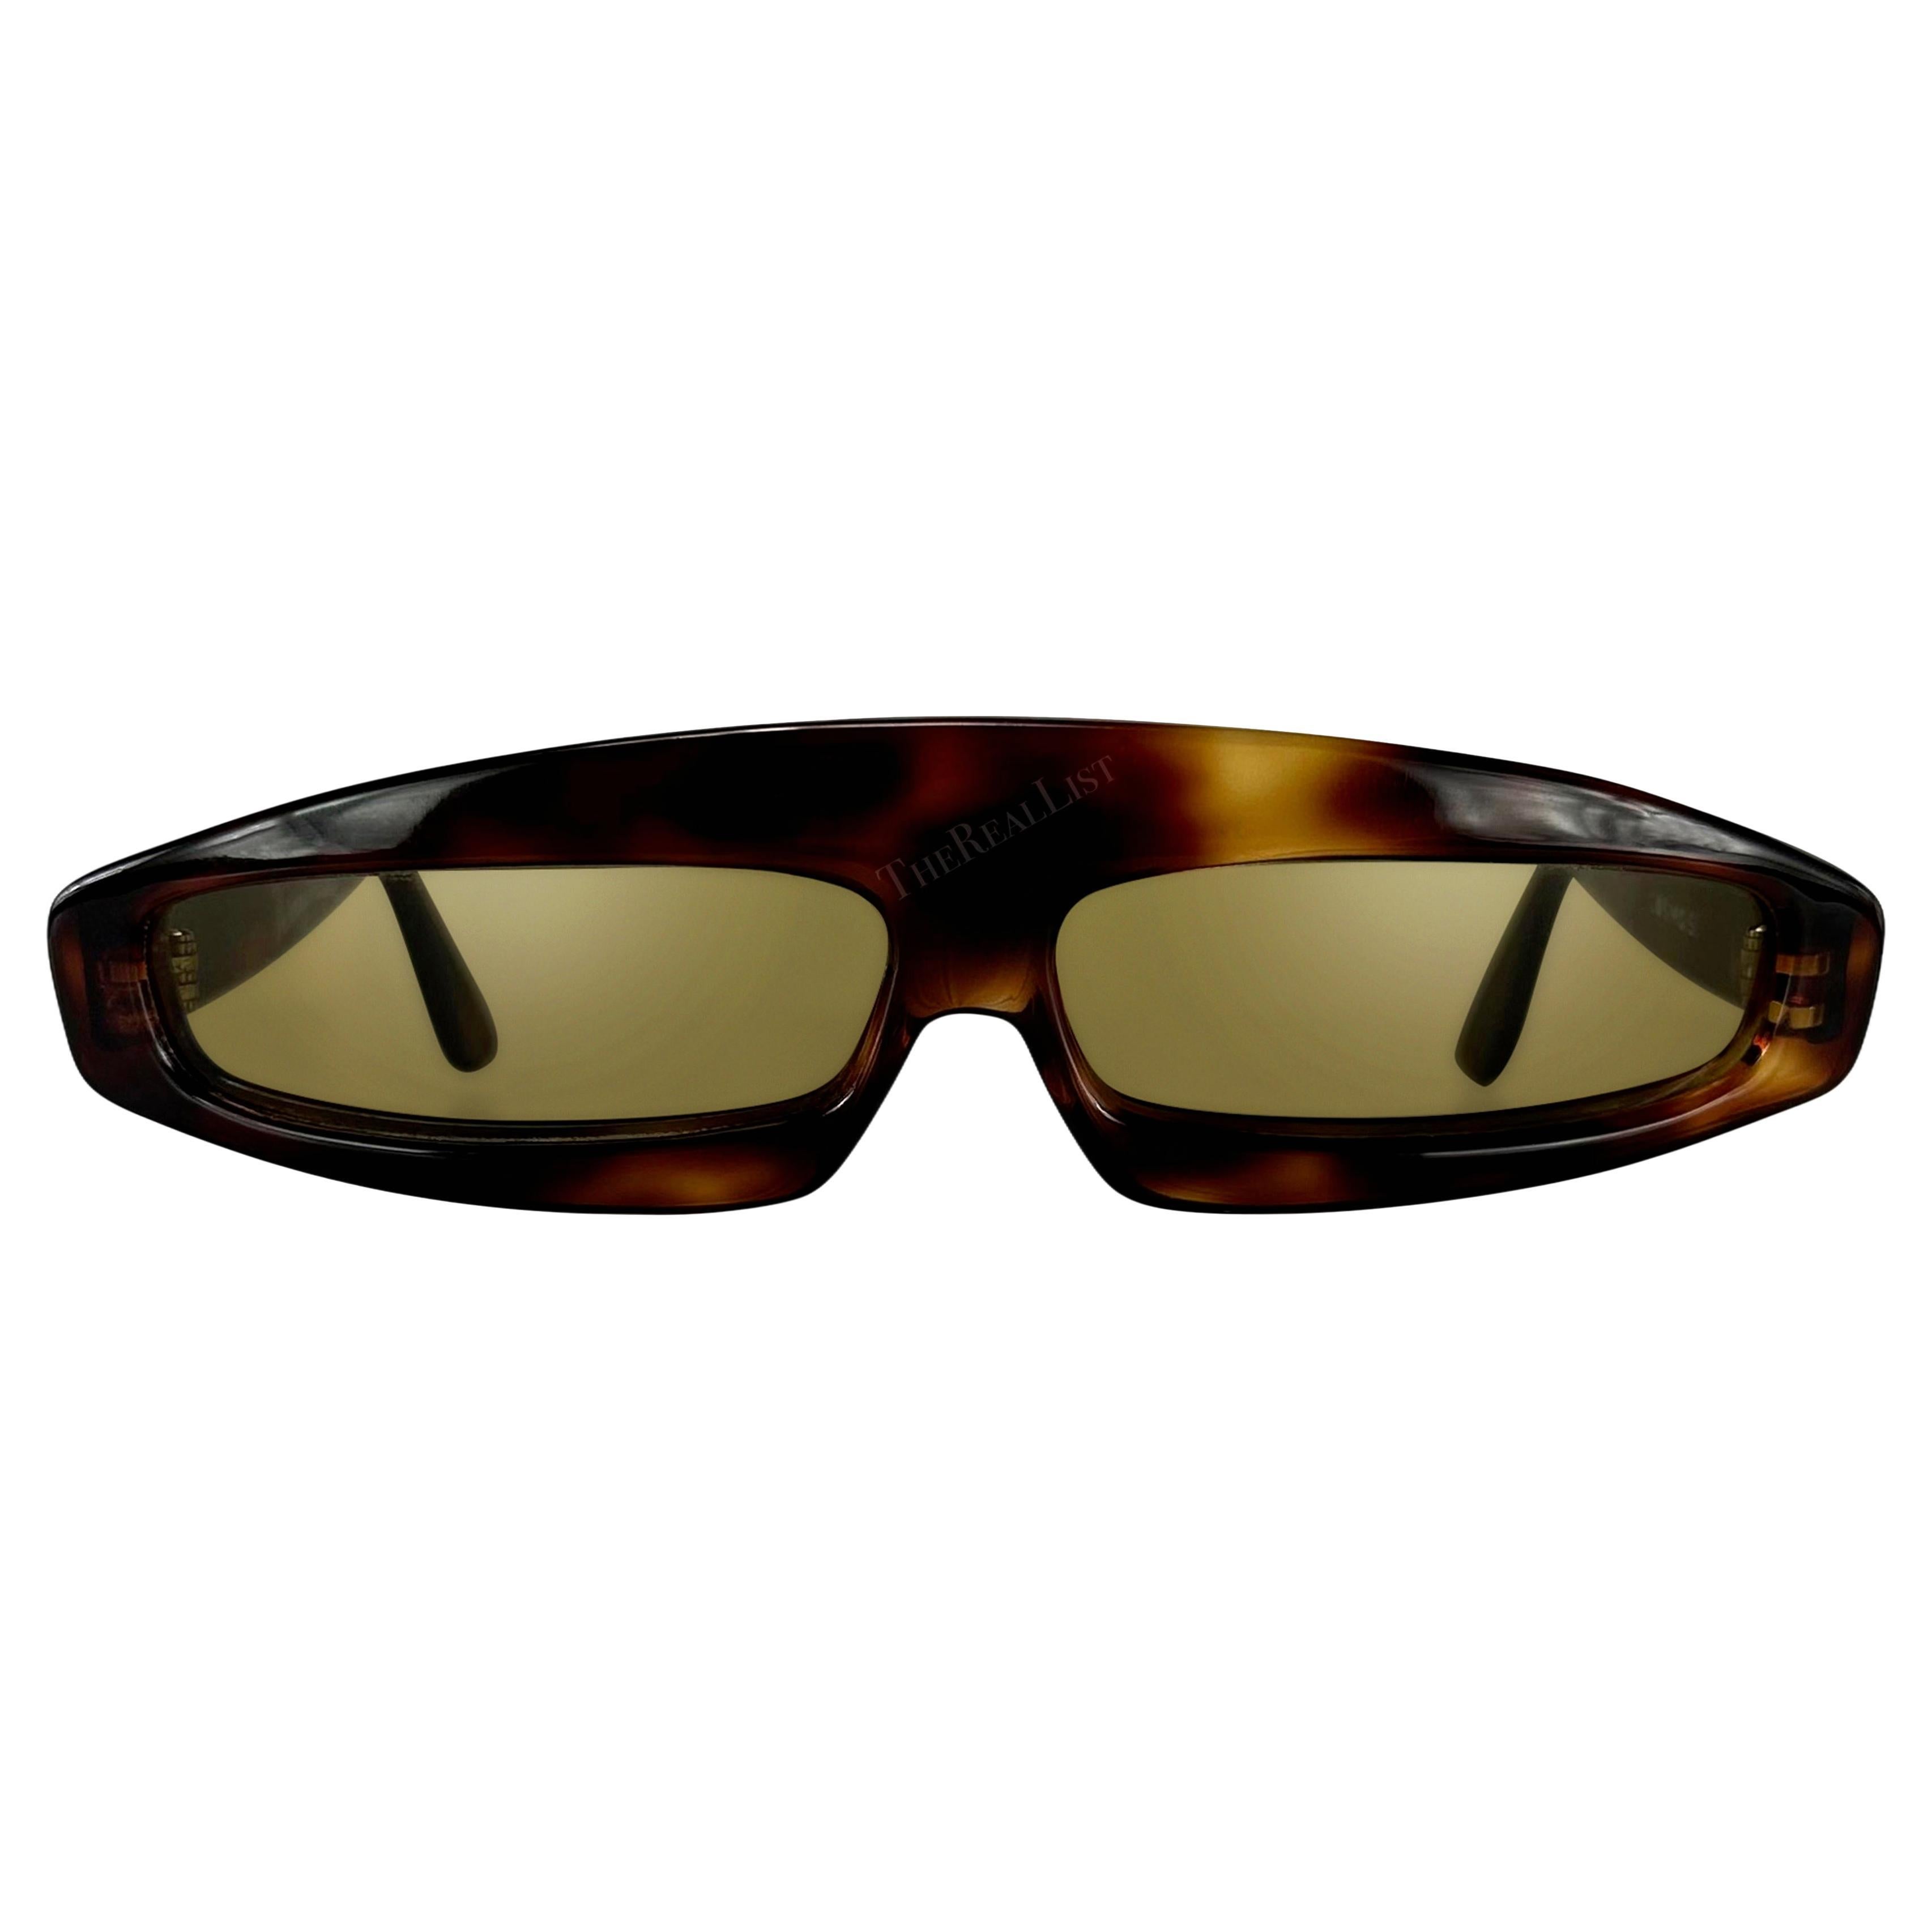 S/S 1979 Thierry Mugler Runway Brown Faux Tortoise Shell Rounded Sunglasses  For Sale